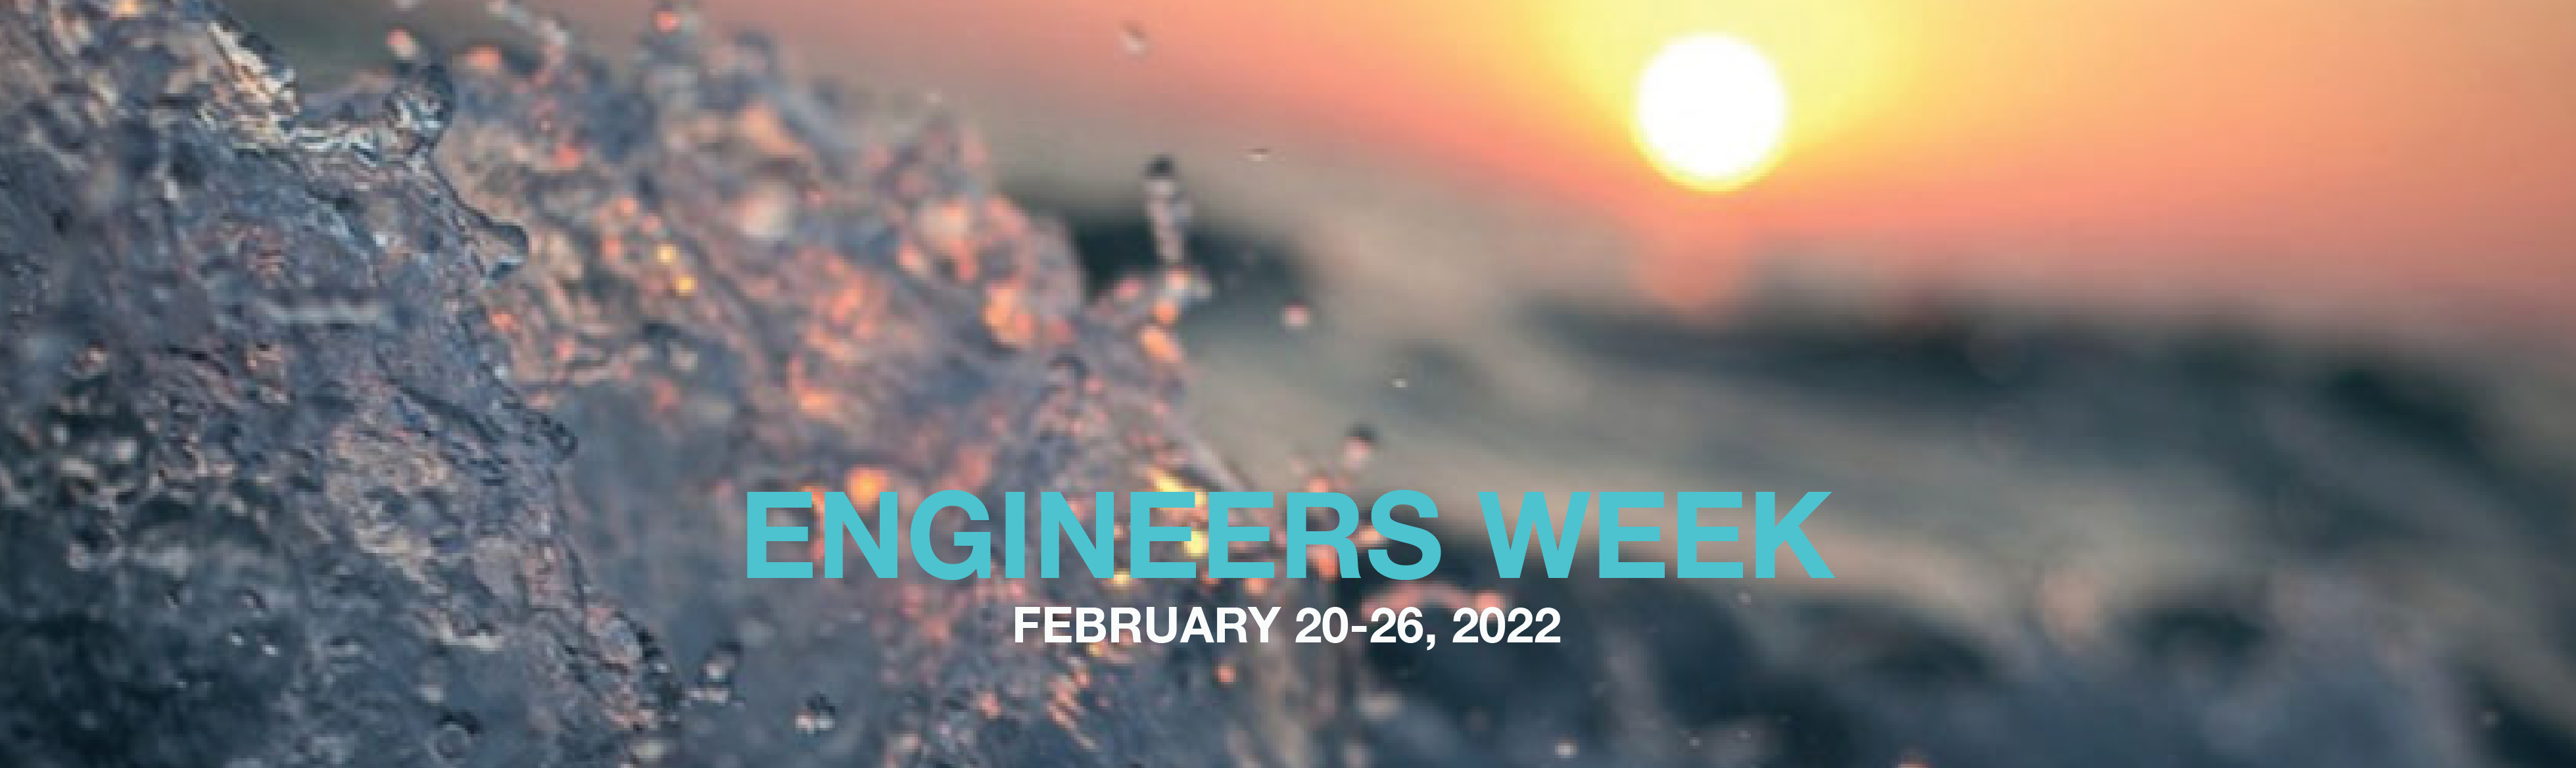 Engineers Week 2022: Solving problems and providing solutions